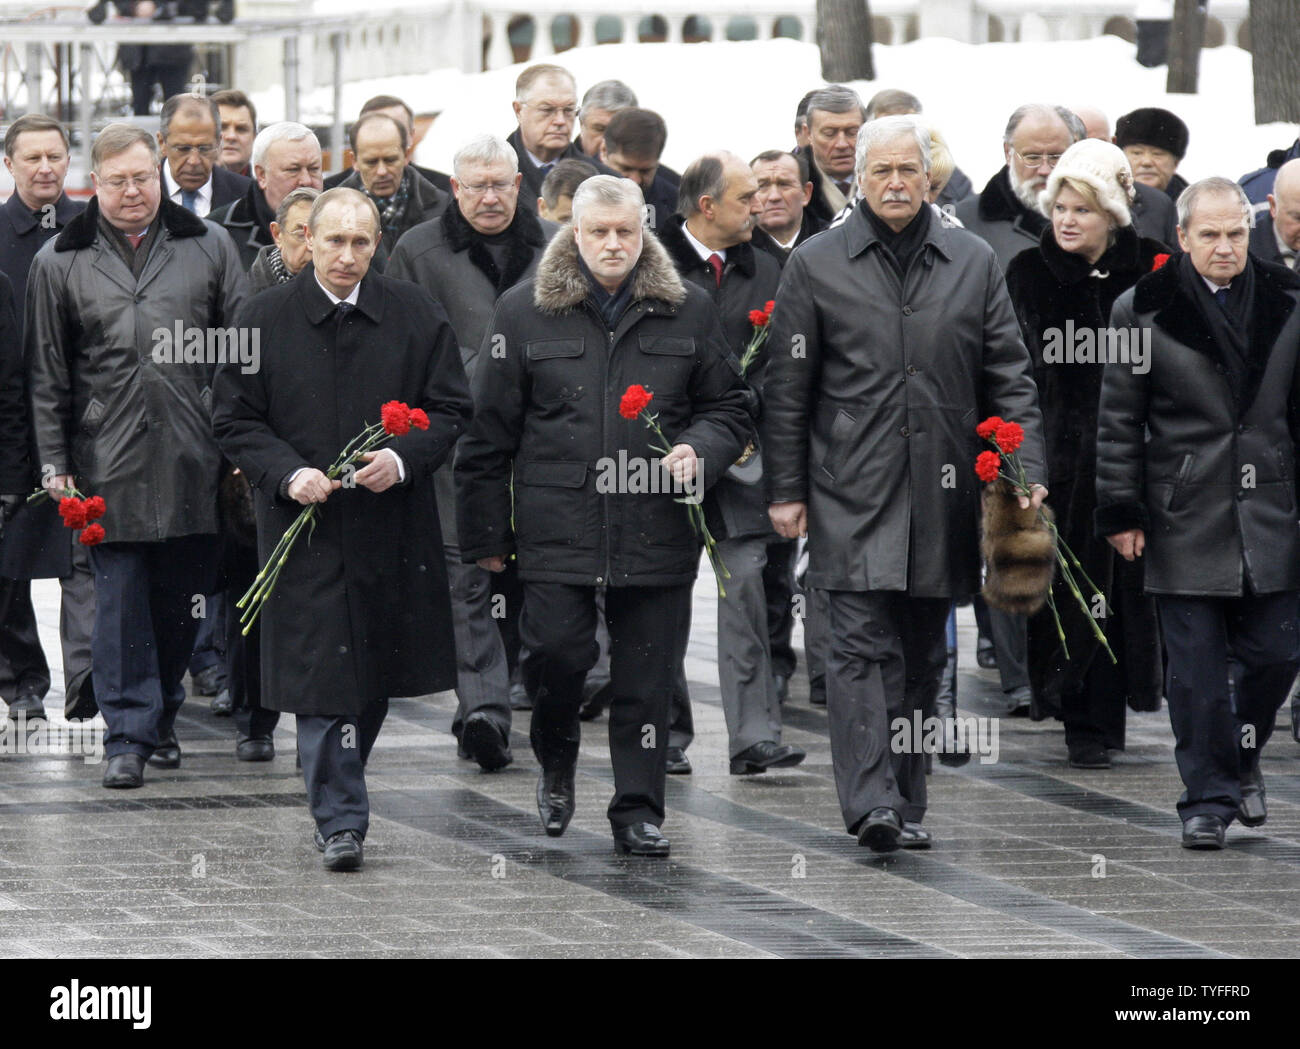 (L-R) Russian Prime Minister Vladimir Putin, Federation Council speaker Sergei Mironov, Parliament speaker  Boris Gryzlov and the Constitutional Court chairman Valery Zorkin take part in the ceremony to light the eternal flame at the Tomb of the Unknown Soldier outside the Kremlin in Moscow on February 23, 2010. The eternal flame was temporarily moved for three months during constructions of the Tomb of the Unknown Soldier and relighted today to to mark the Defender of the Fatherland Day in Russia. UPI/Alexander Natin Stock Photo